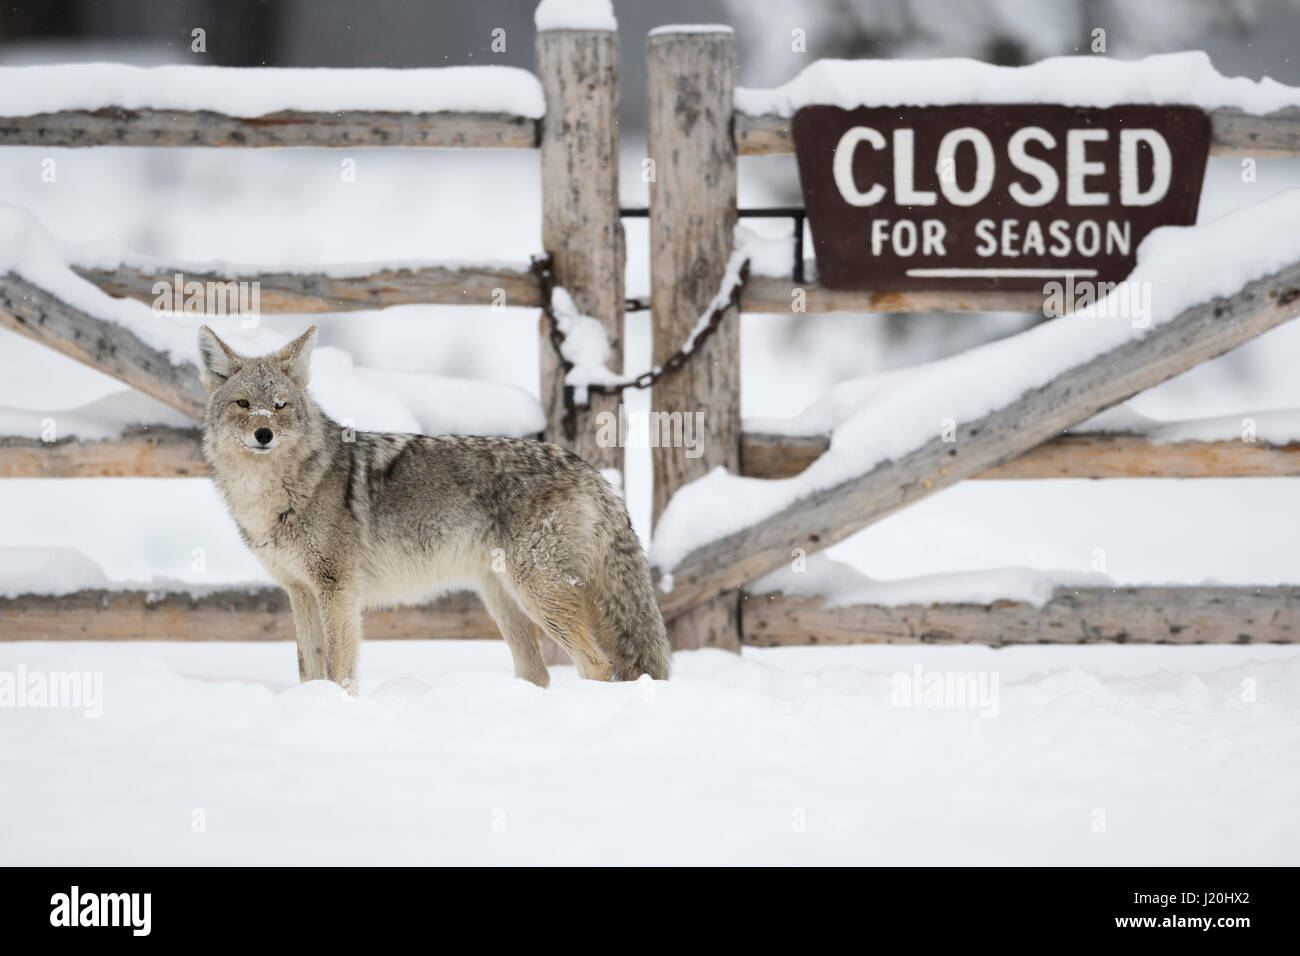 Coyote / Kojote ( Canis latrans ) standing in front of a wooden gate, closed for winter season, funny situation, lots of snow, Yellowstone NP, USA. Stock Photo